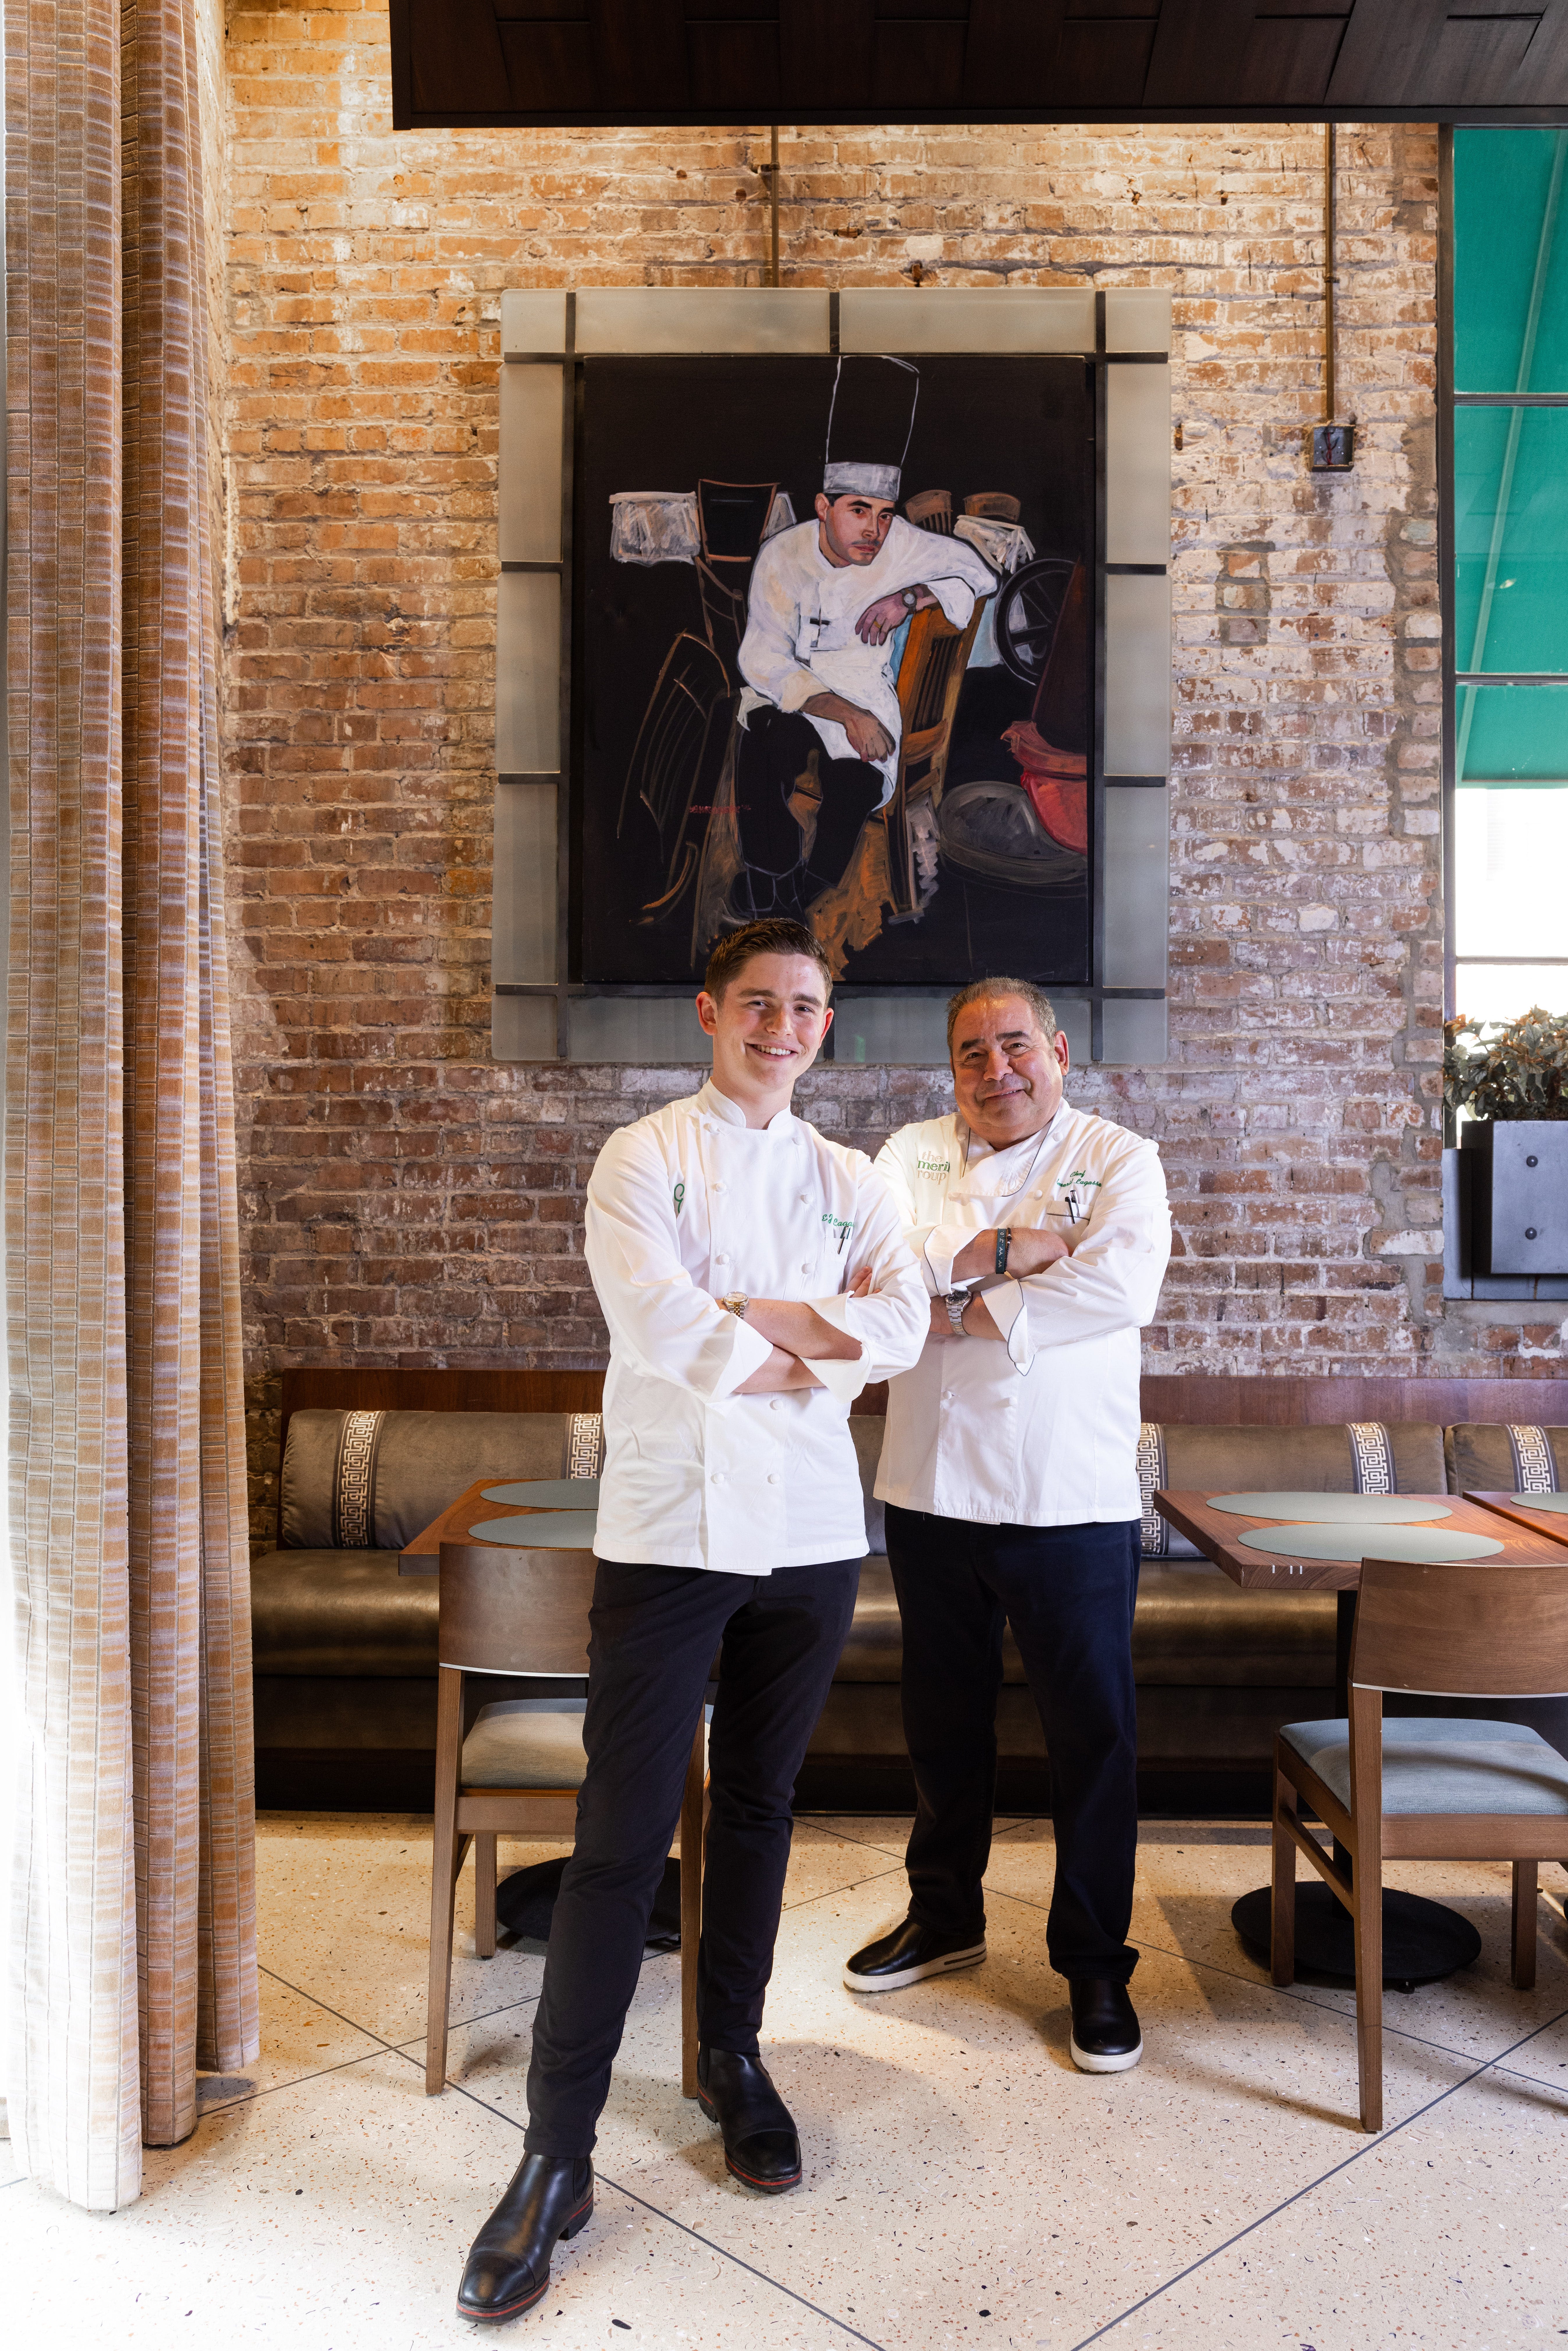 'I was truly home': Emeril aims to capture the essence of Fall River in his new restaurant